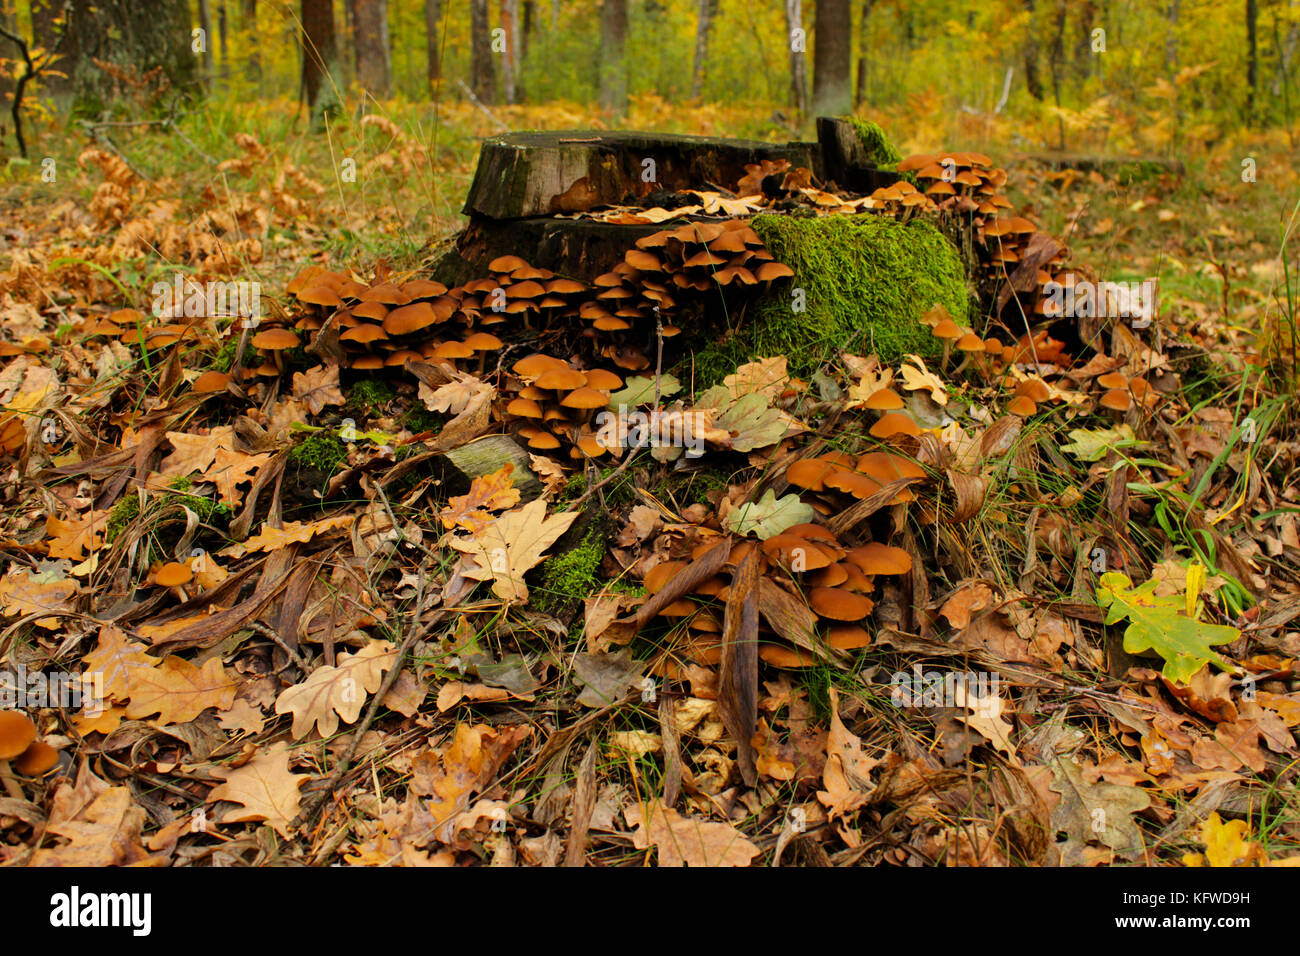 Autumn in forest. Edible and poisonous mushrooms in the wood. Toadstool Stock Photo